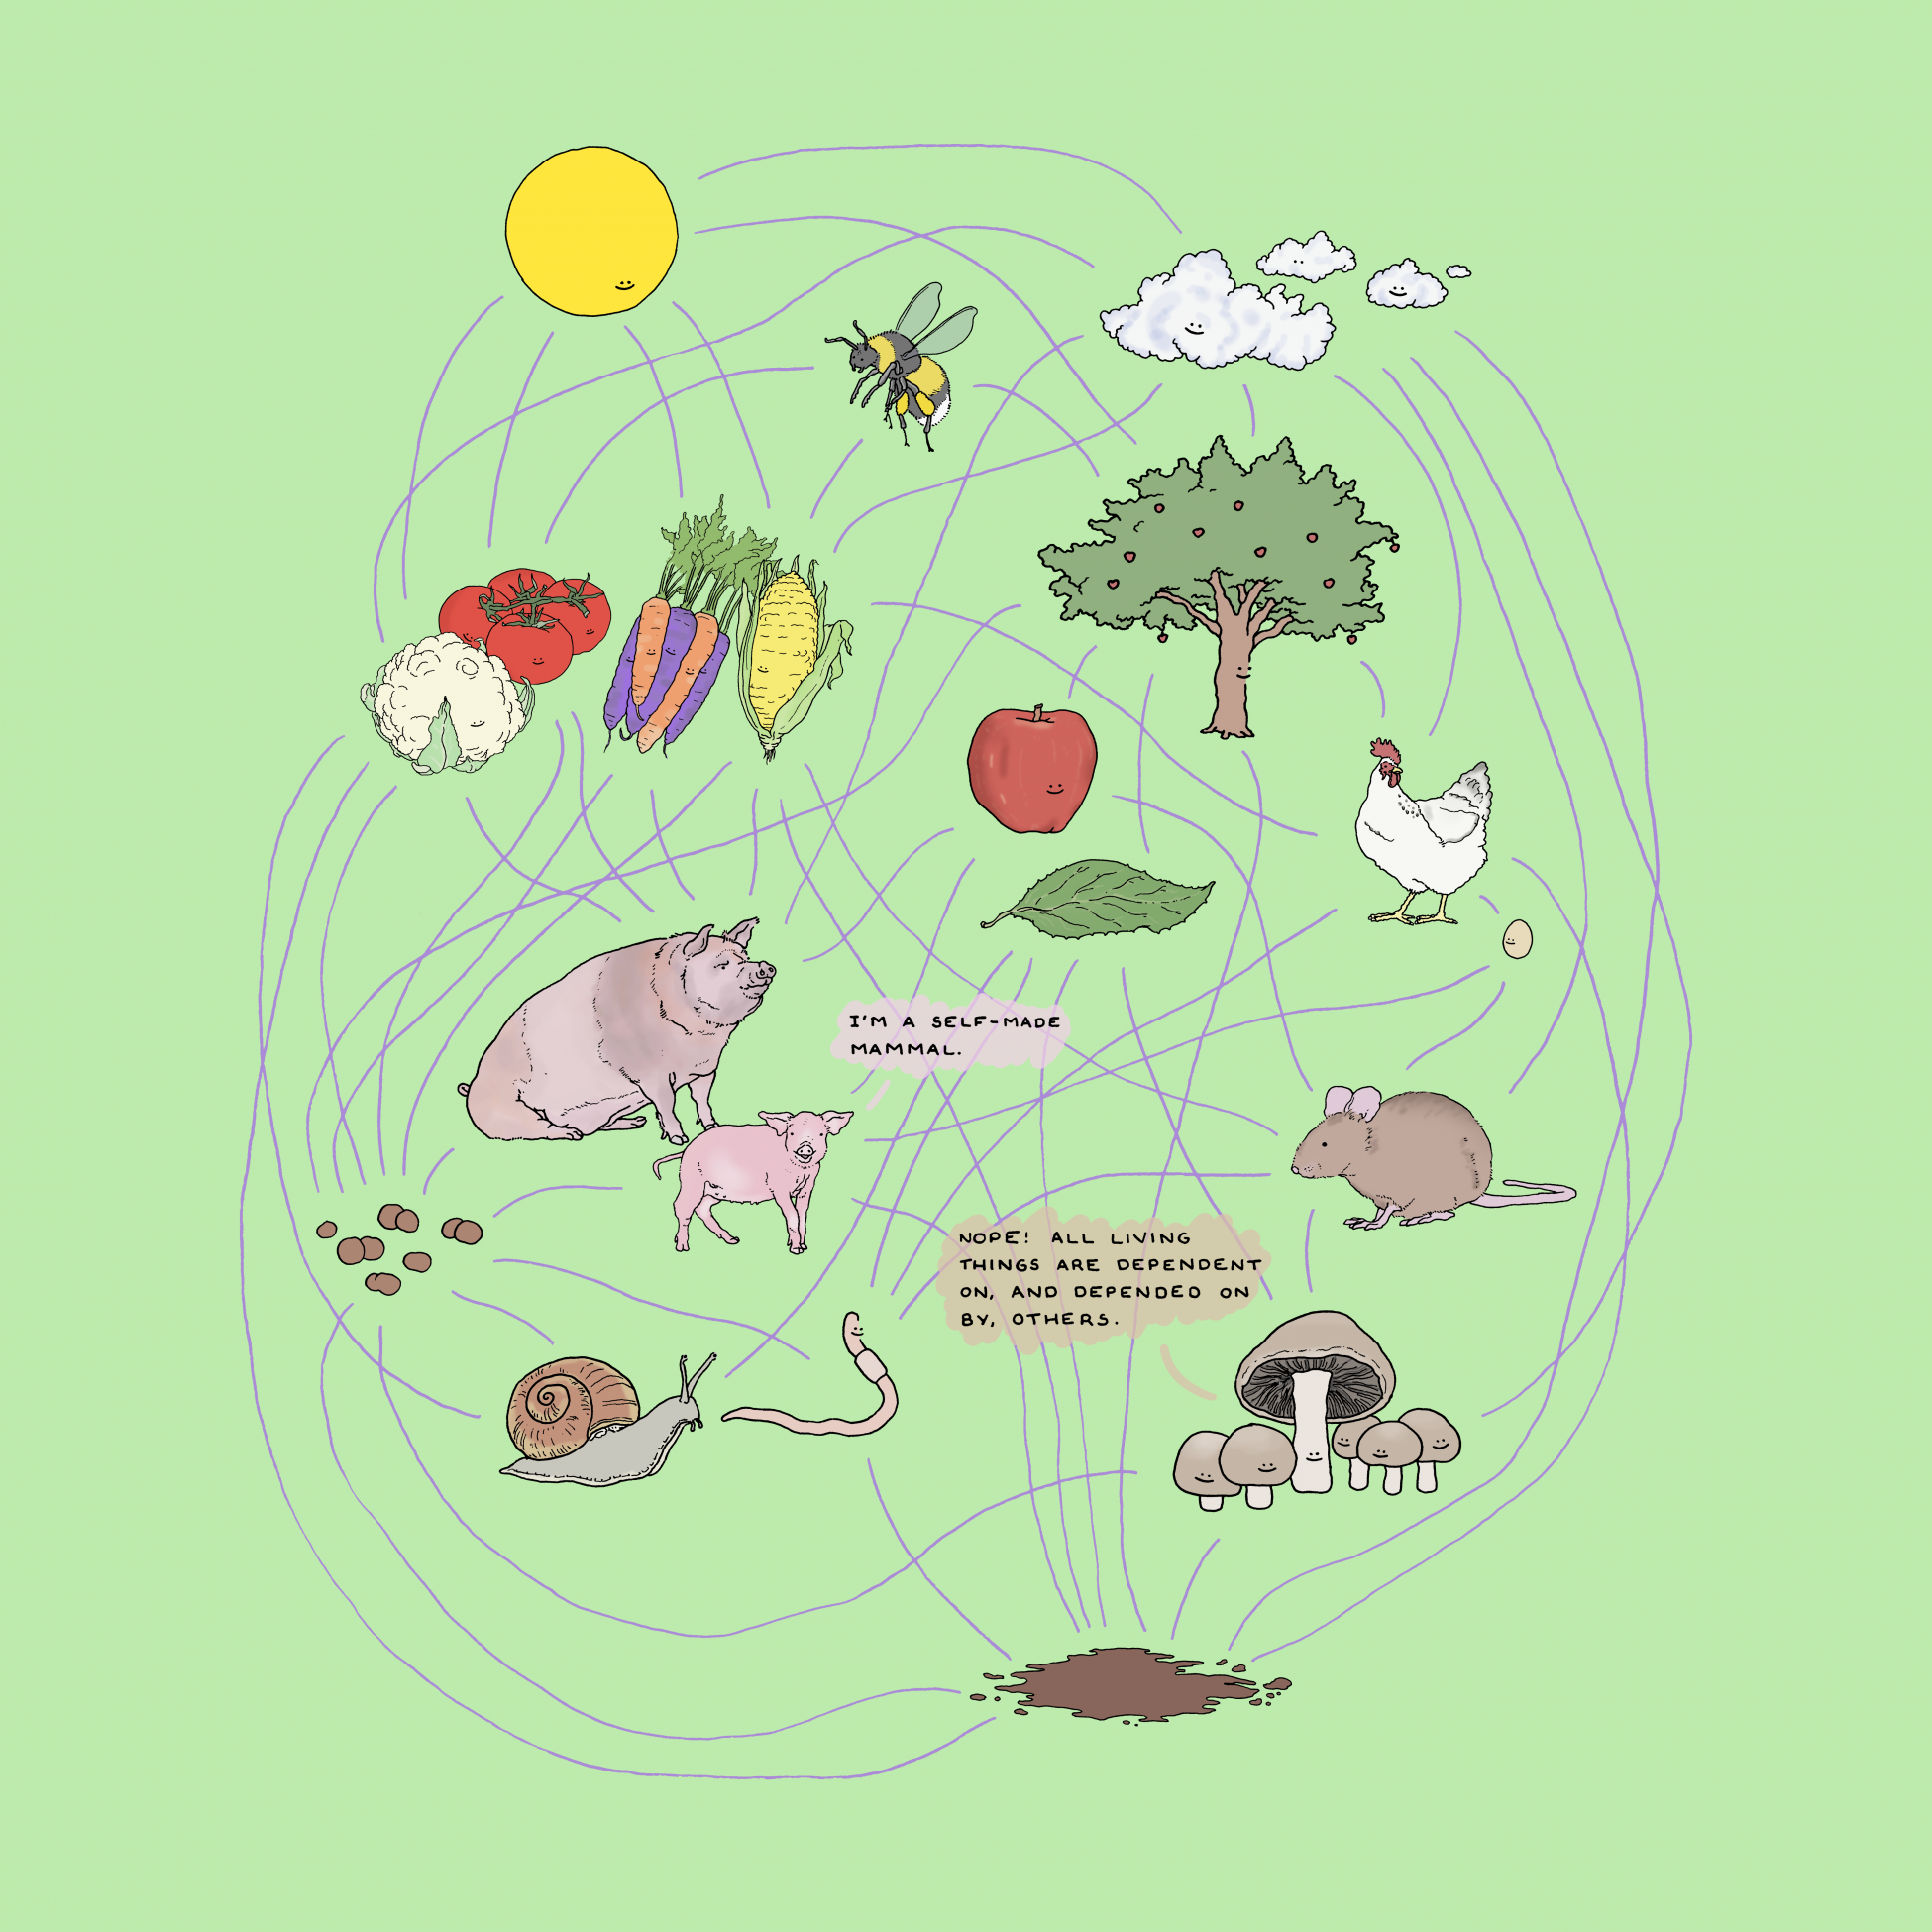 Illustrations of various anthropomorphised foods, animals, a tree, soil, sun and clouds. There are criss-crossing lines connecting all of the foods, animals and other objects together. A piglet is saying 